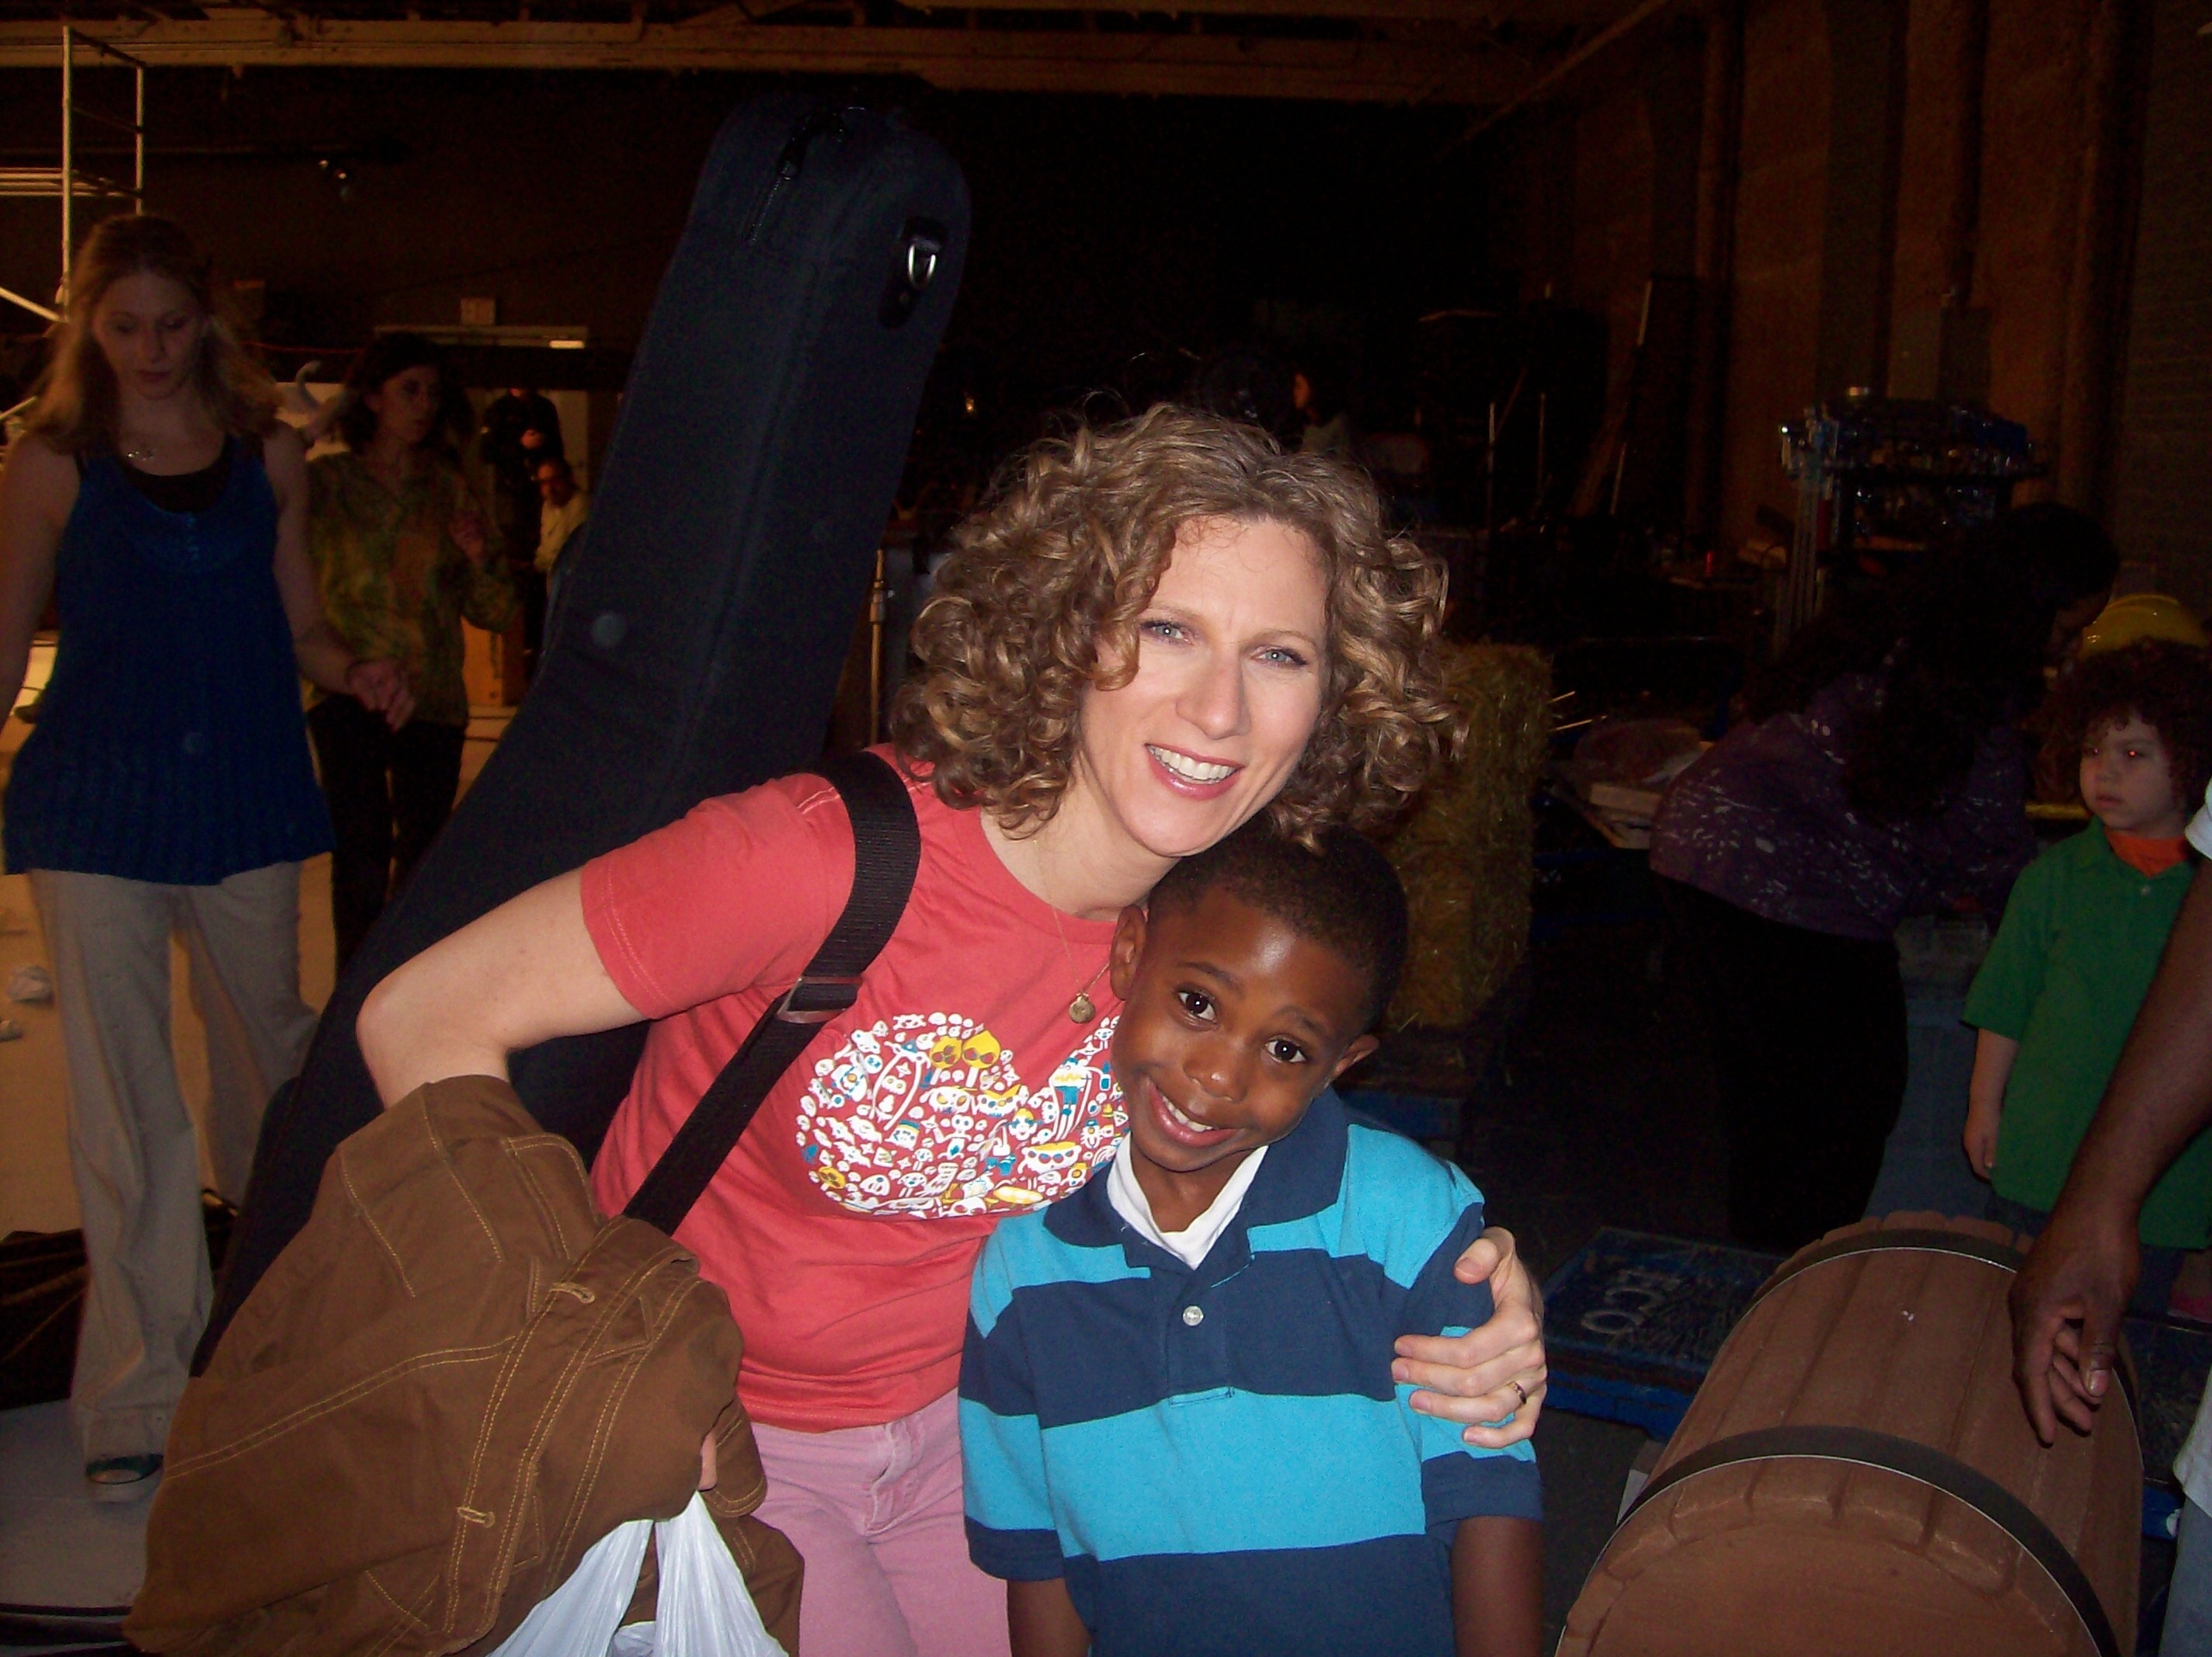 Avery on set with Laurie Berkner (Laurie Berkner Band) after music video shoot in NYC. Picture taken May 23, 2008.